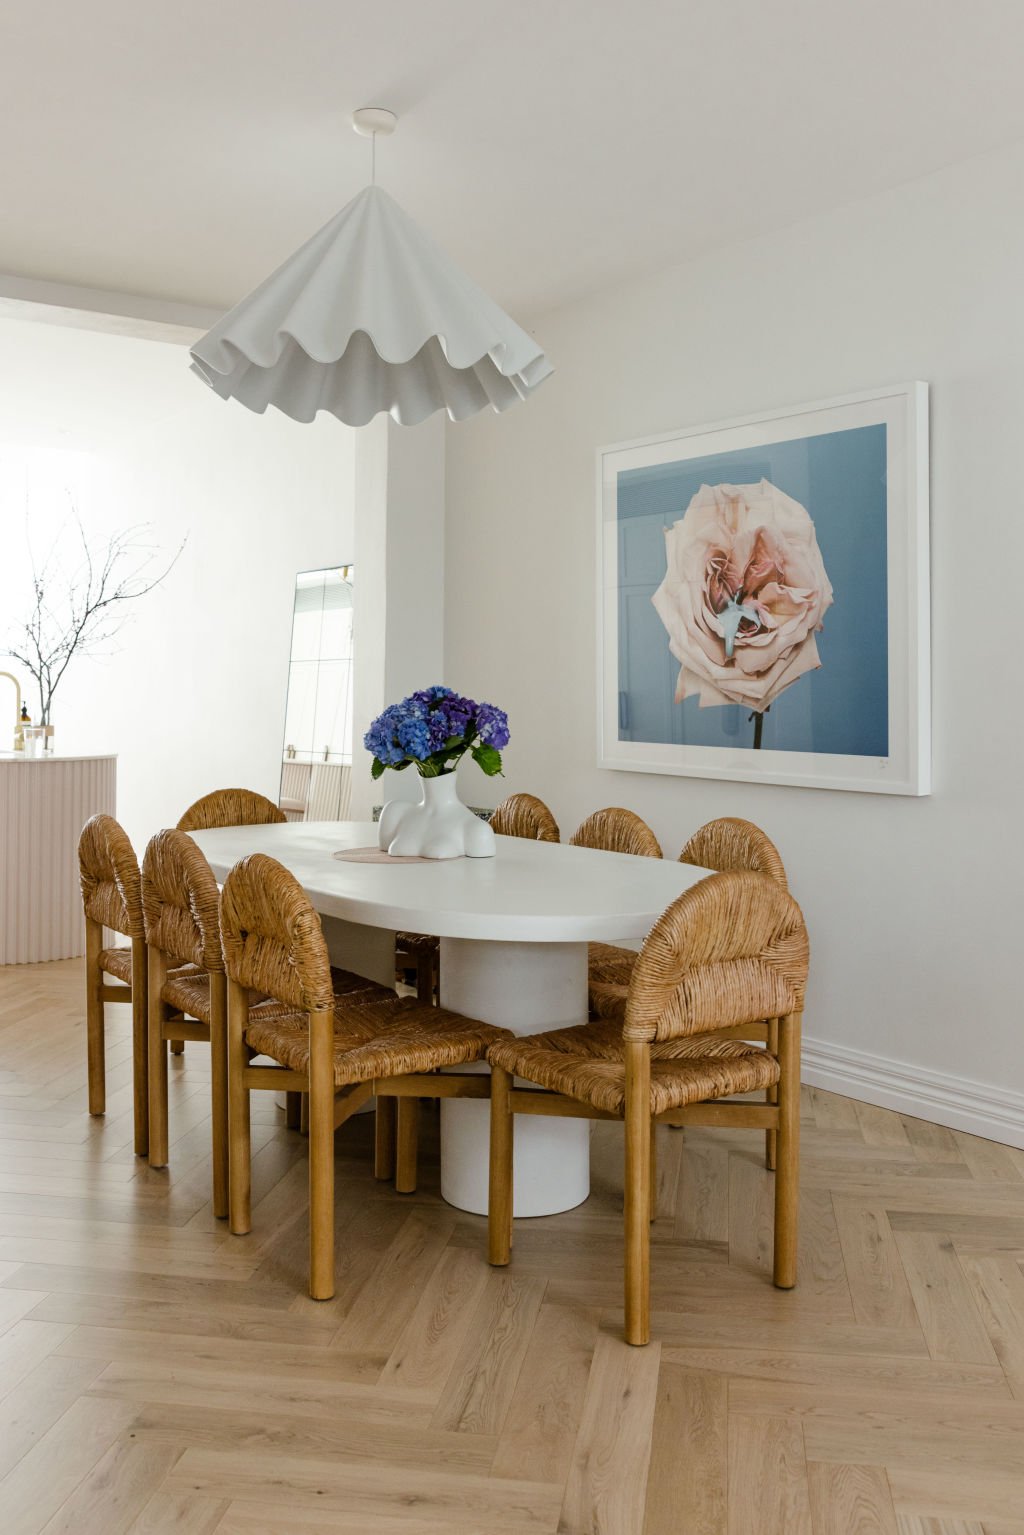 The couple transformed the home from dark and dingy to light, bright and beautiful. Photo: Supplied